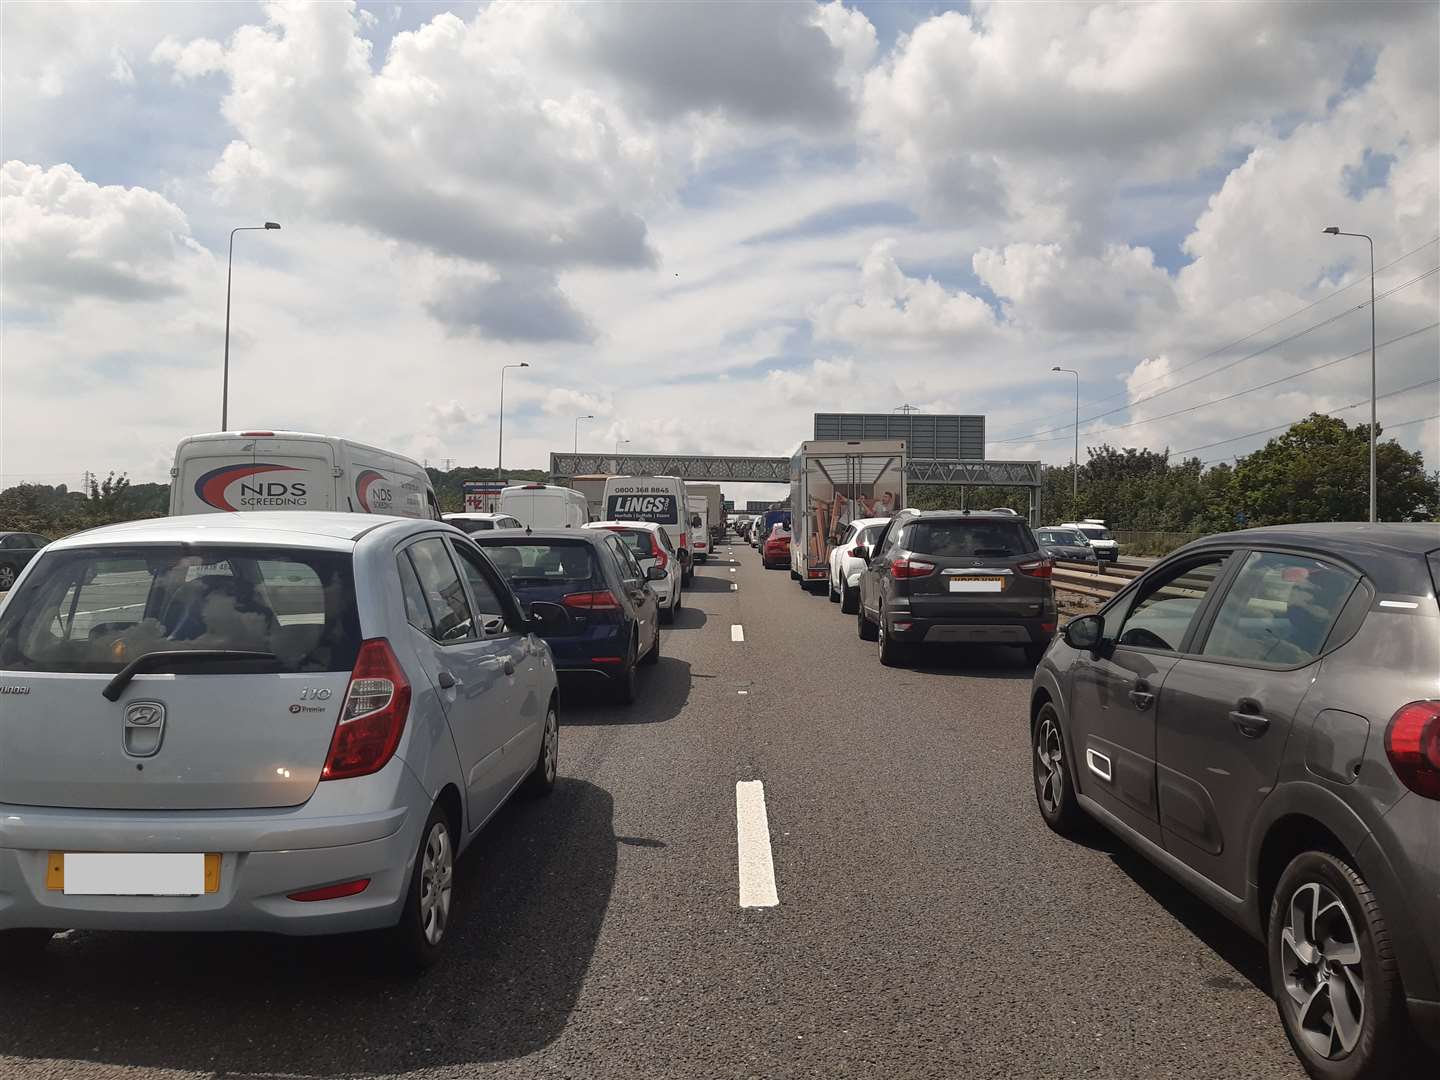 A2 crash is causing severe delays between Ebbsfleet and Bean, near Bluewater